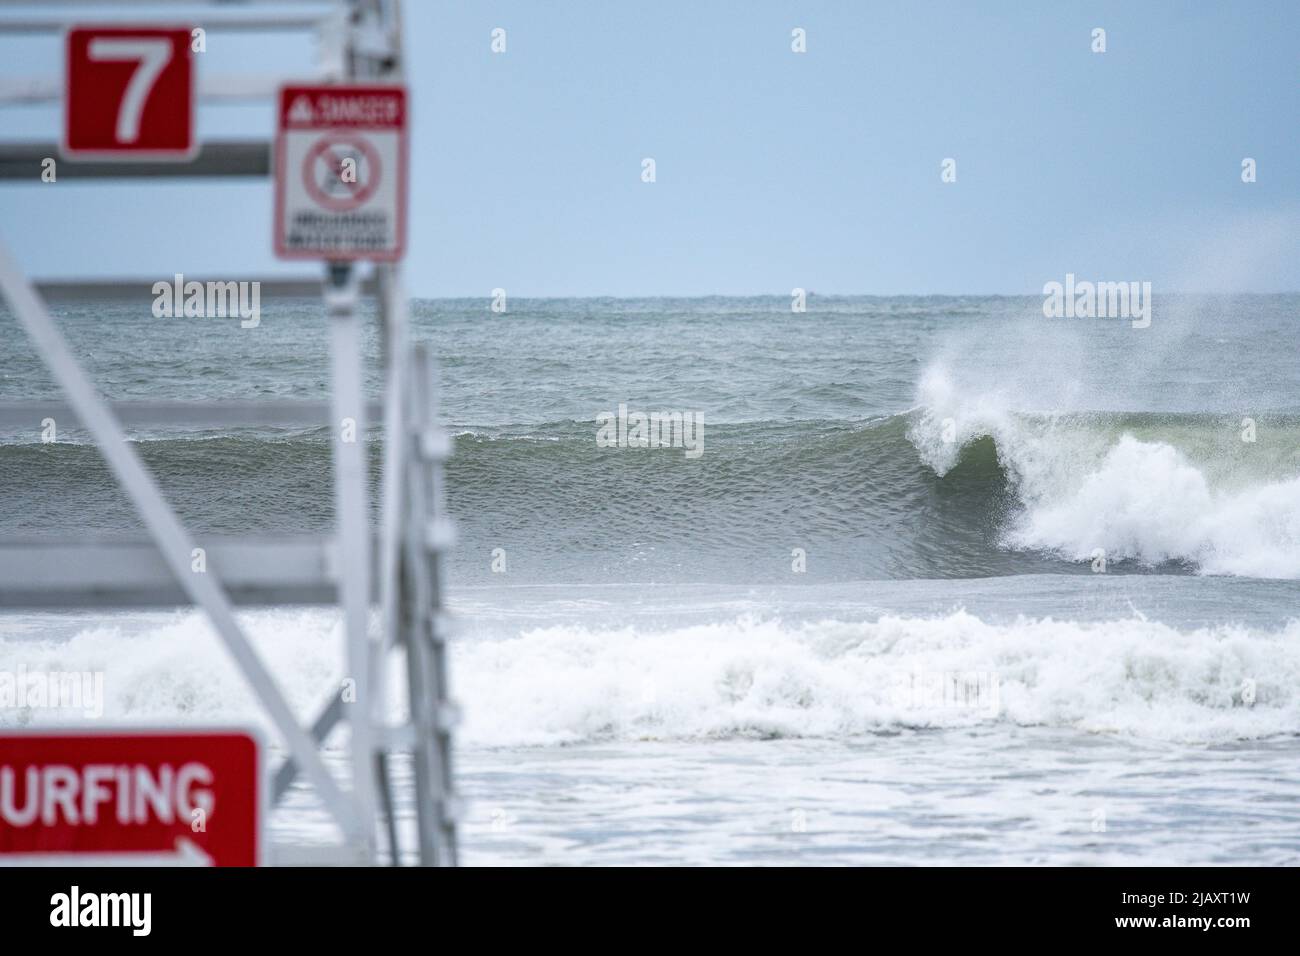 Stock photos of tropical storm Henri in 2021, Newport, RI. Stock photos of hurricane. Stock photos of extreme weather. Empty life guard chair, beach c Stock Photo